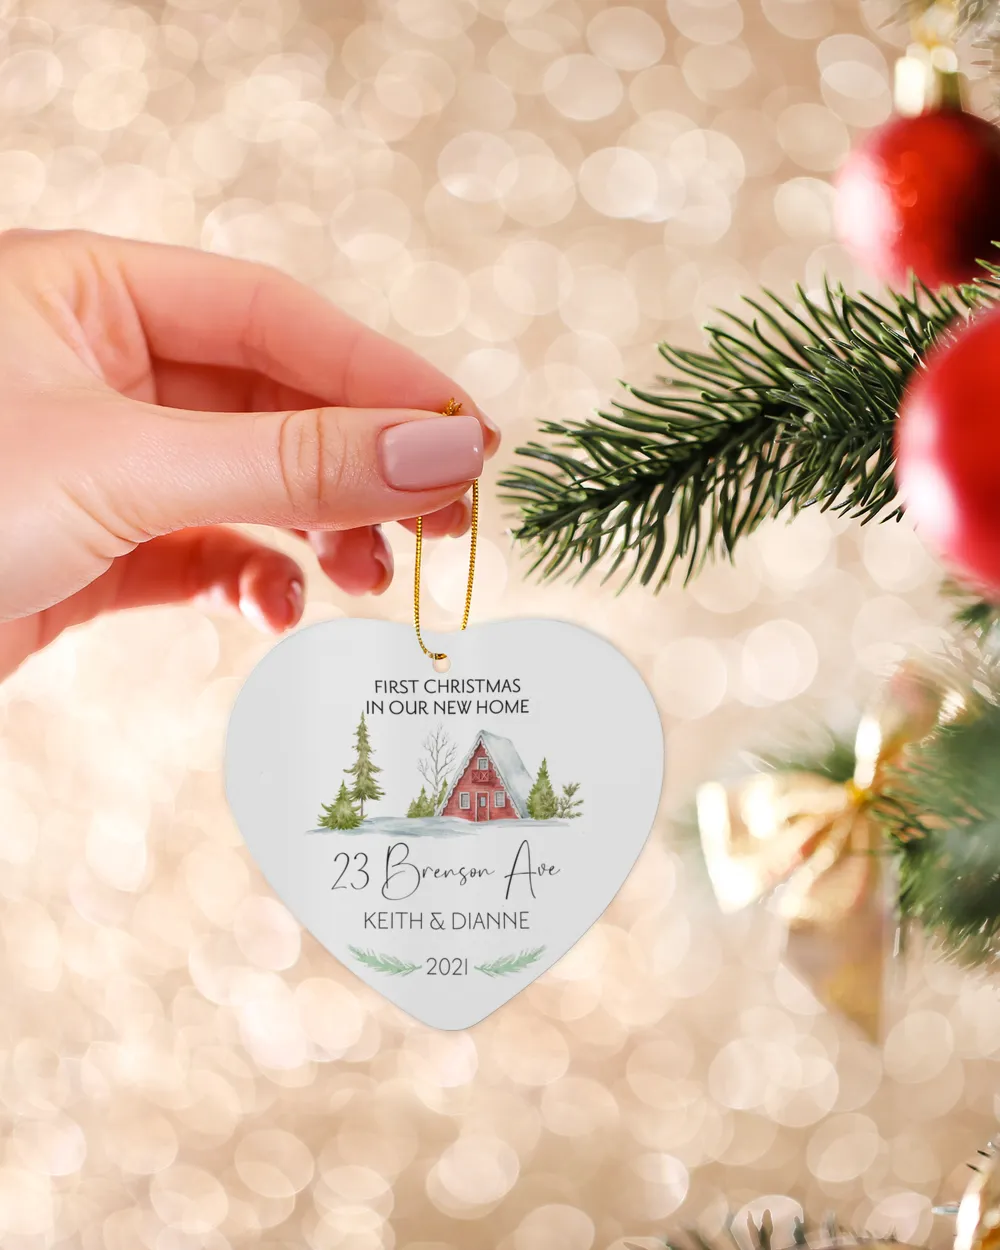 First Christmas In Our New Home With Address, Names and Year - New Home Christmas Ornament | Christmas Ornaments | Pine Tree Ornaments.